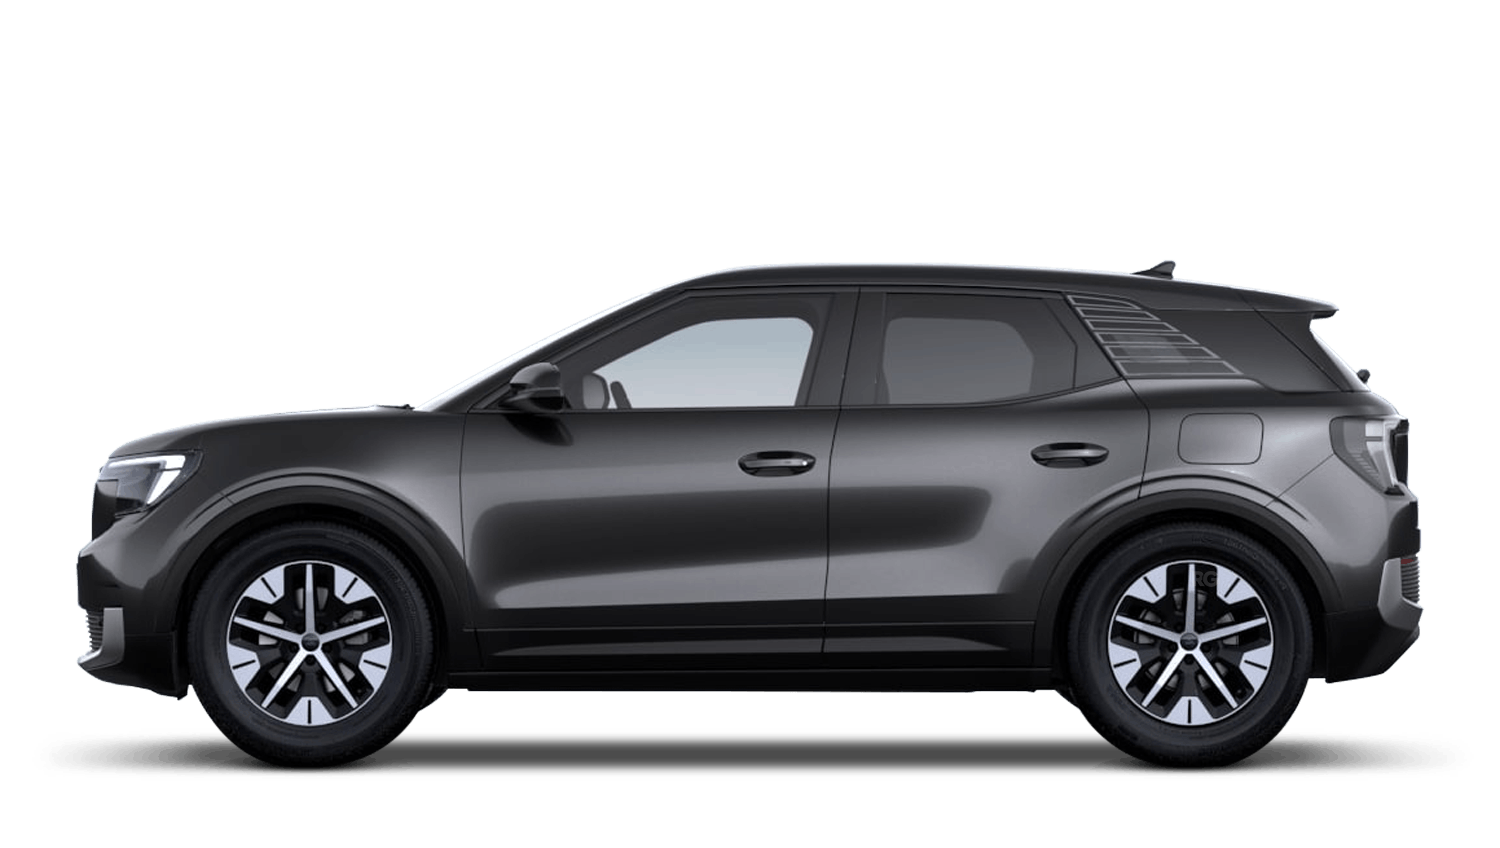 Ford Explorer SELECT 77kWh Extended Range Electric Offer